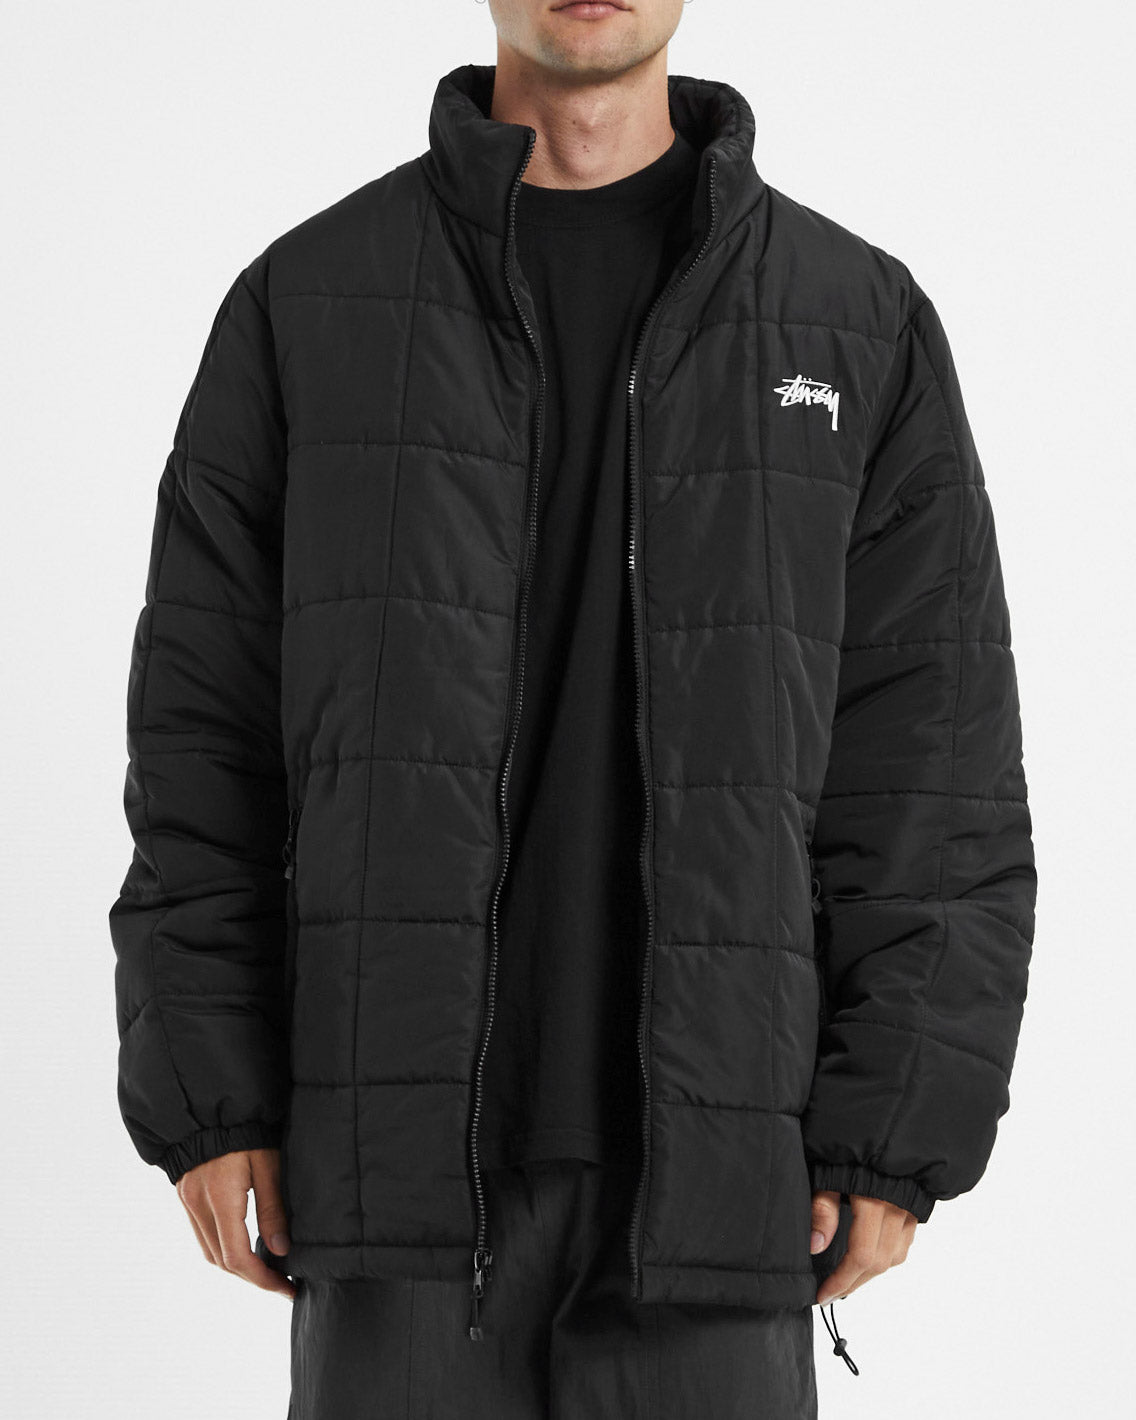 Stussy Hooded Square Puffa Jacket in Black FallenFront NZ